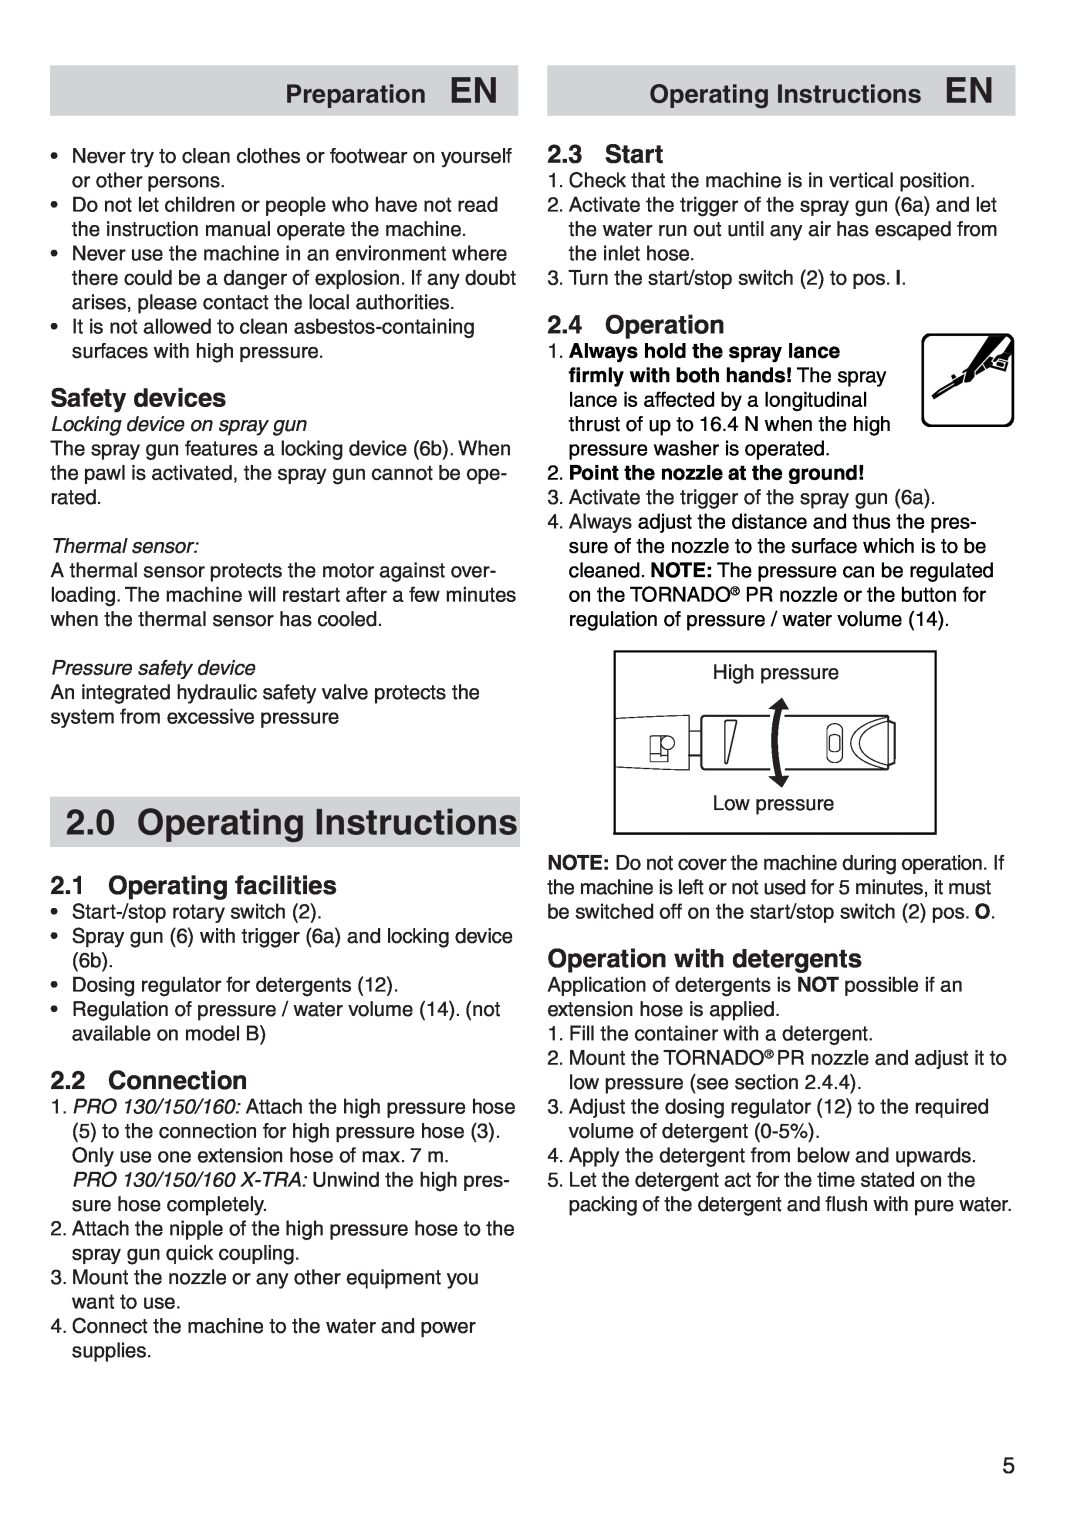 Nilfisk-Advance America P 130.1 2.0Operating Instructions, Preparation EN, Safety devices, 2.1Operating facilities 